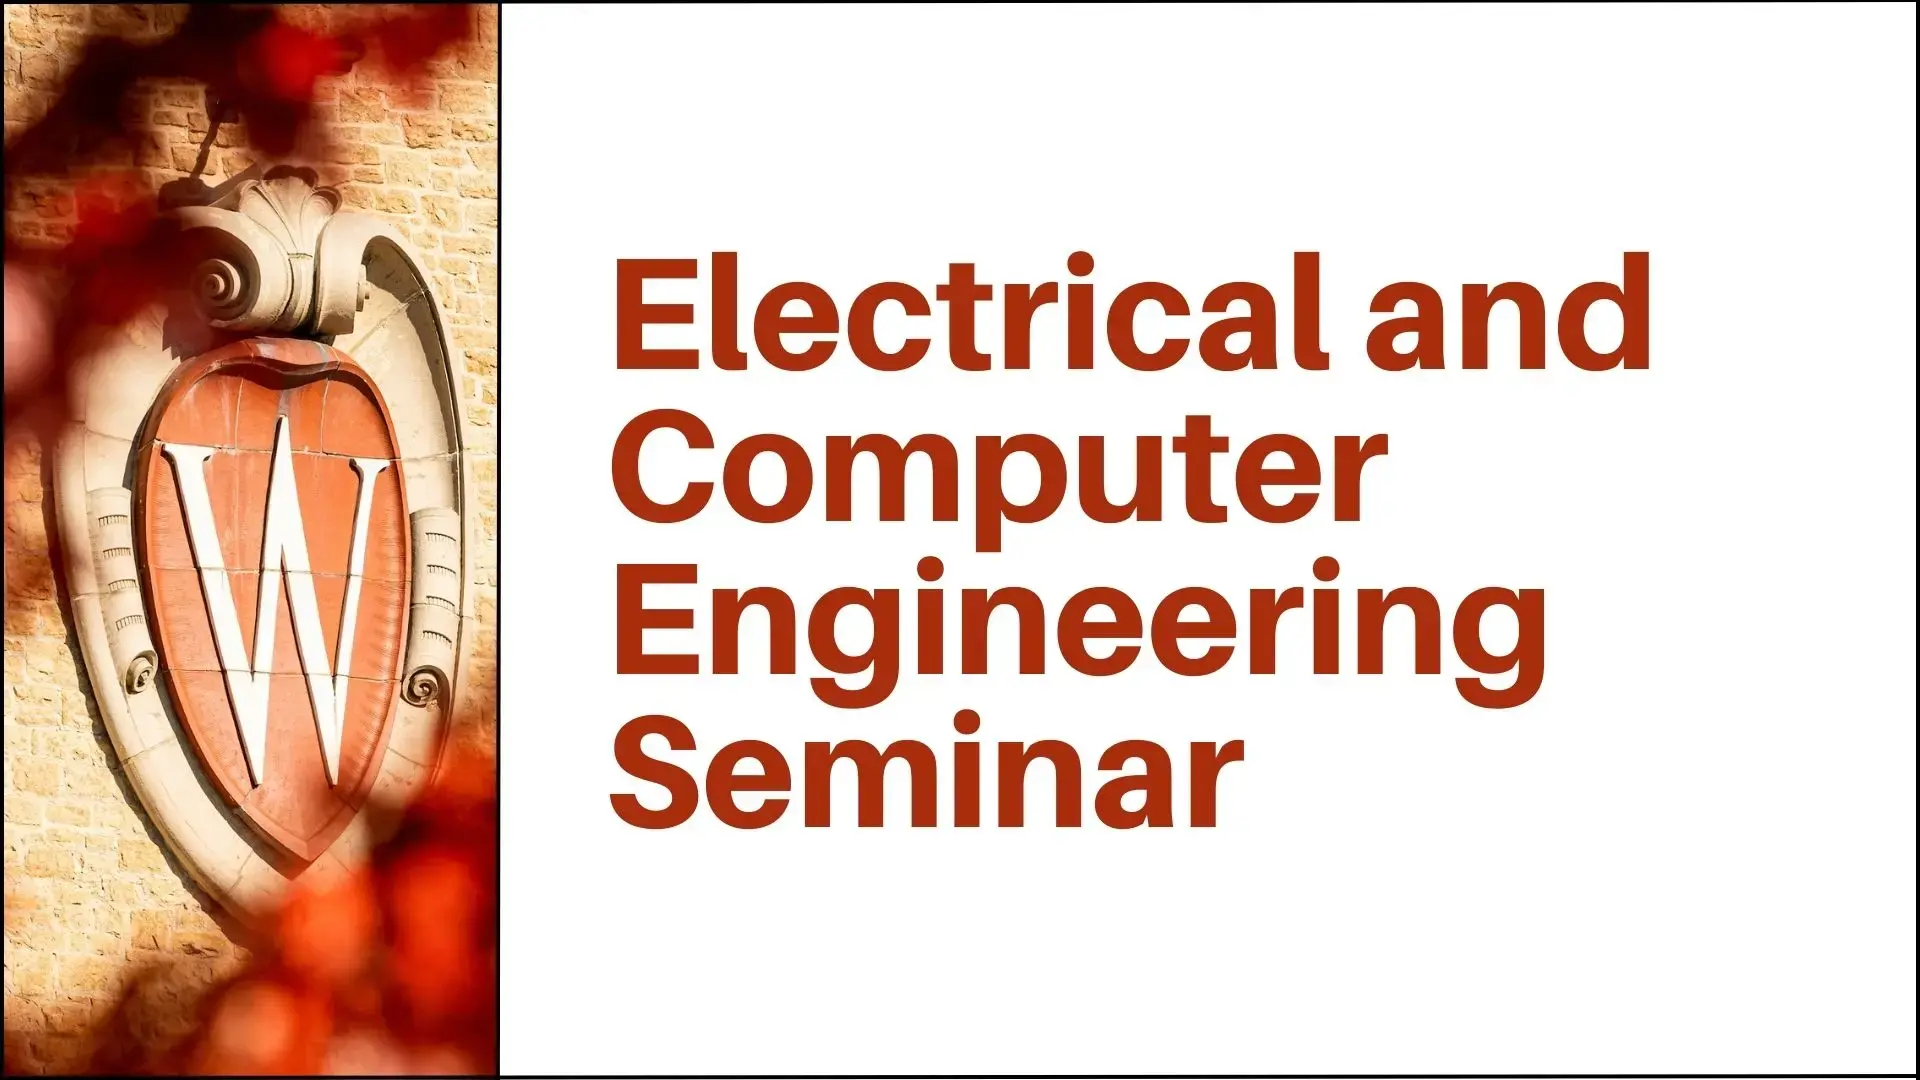 Text: Electrical and Computer Engineering Seminar Image: W Crest on Field House